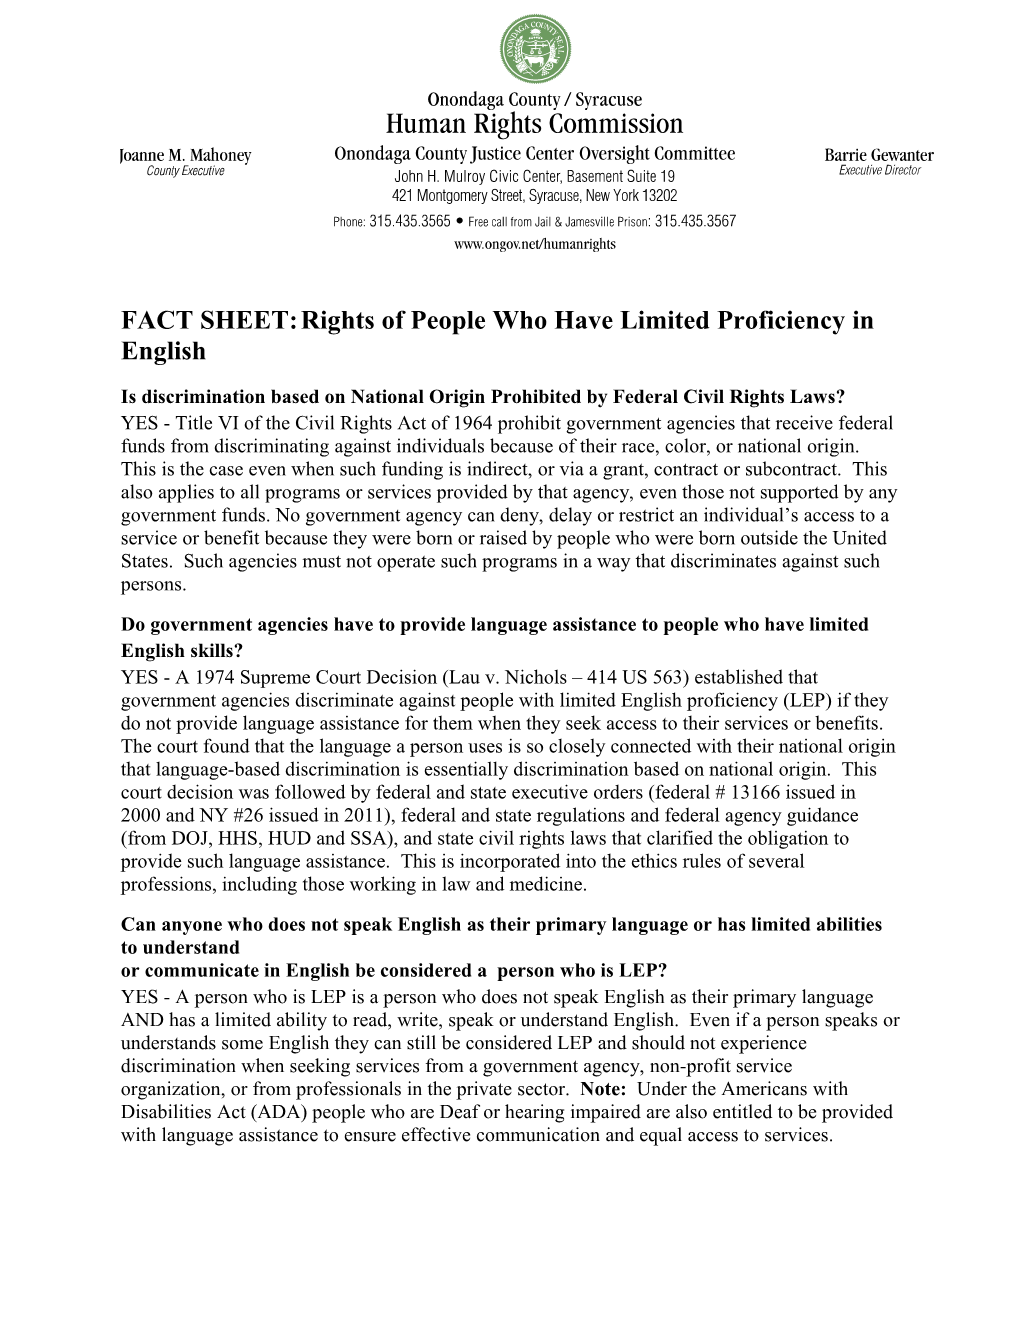 FACT SHEET:Rights of People Who Have Limited Proficiency in English